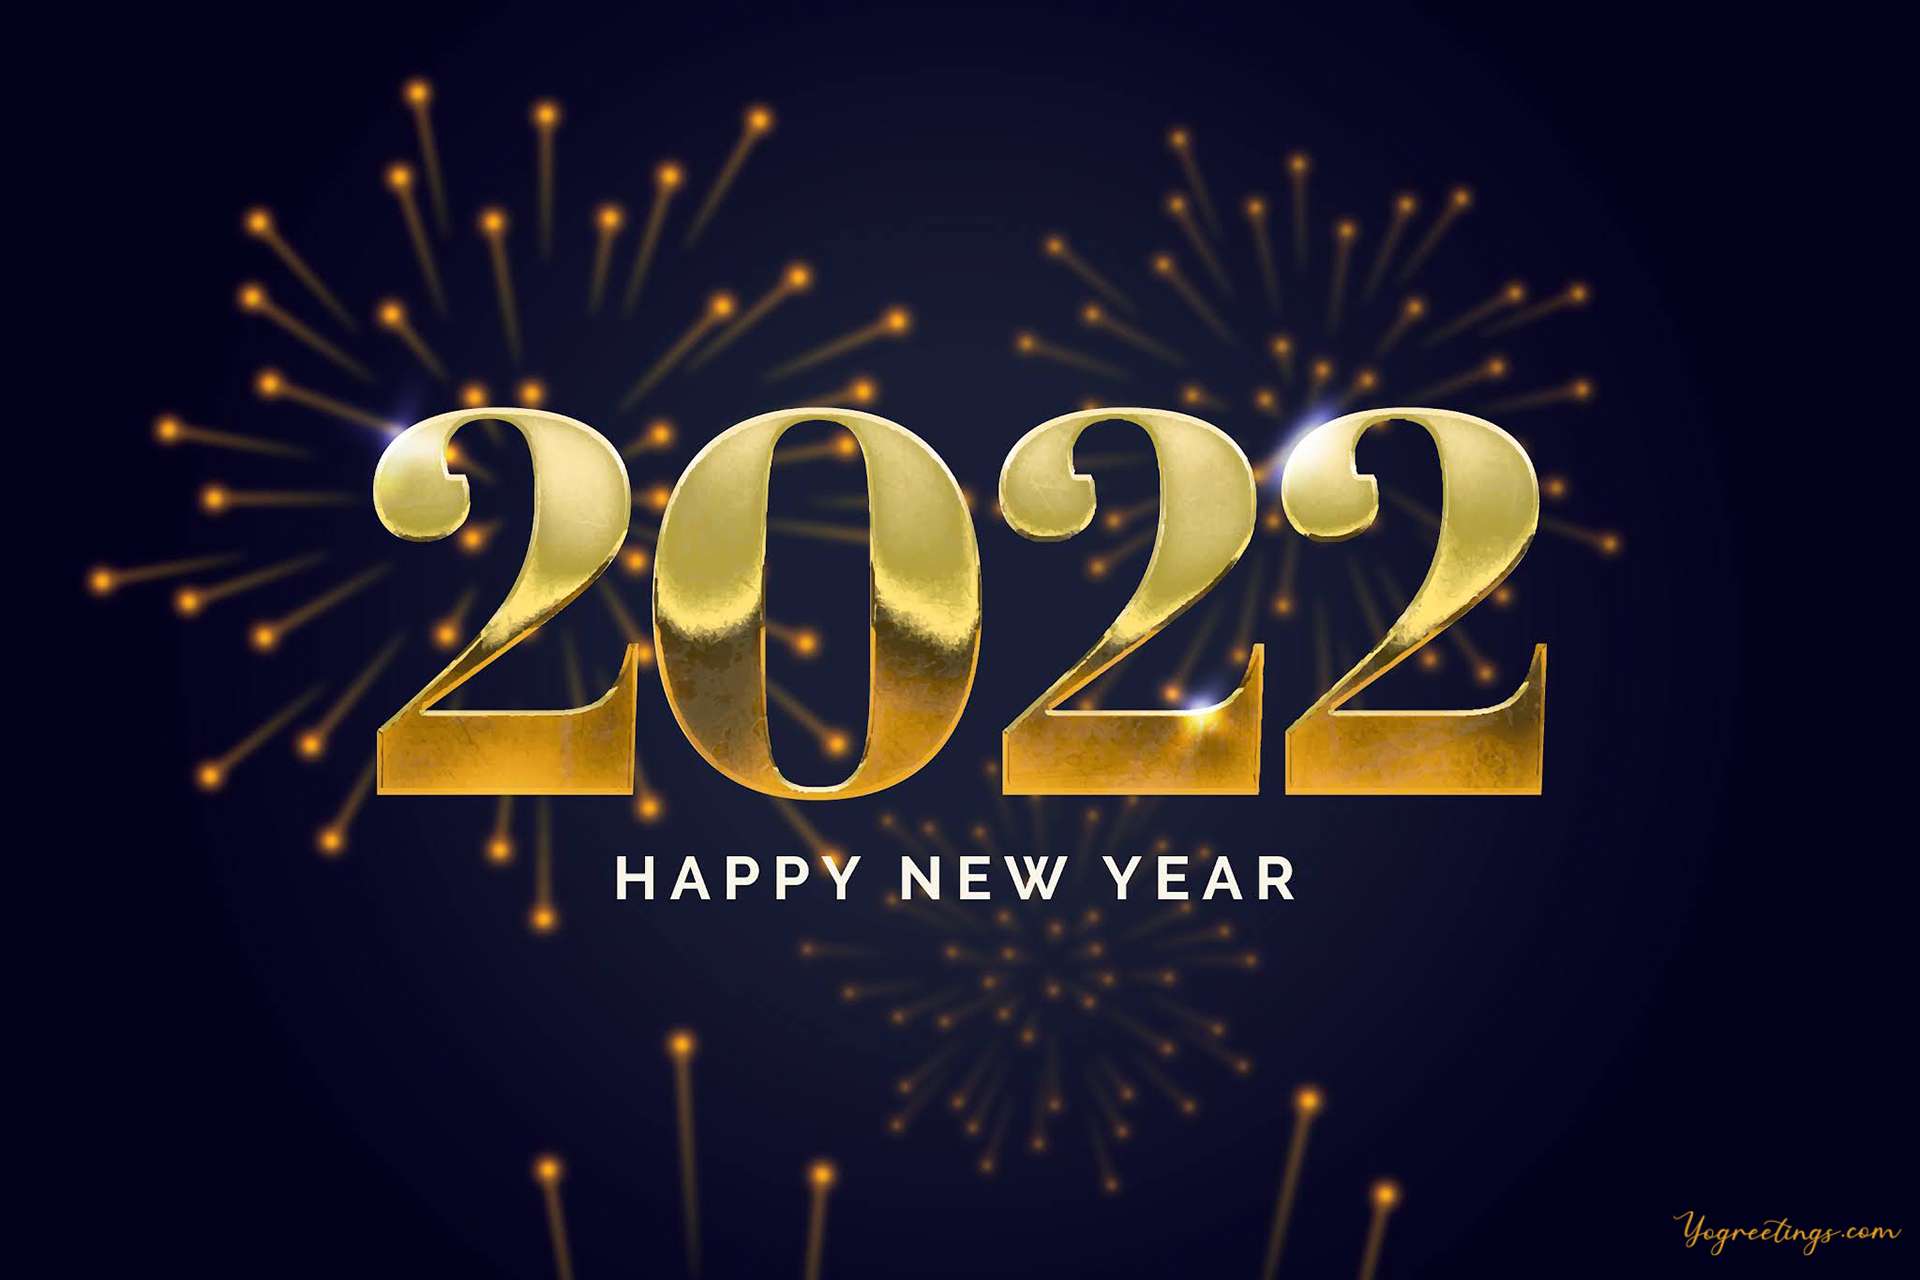 Download unique happy new year wallpapers 2022